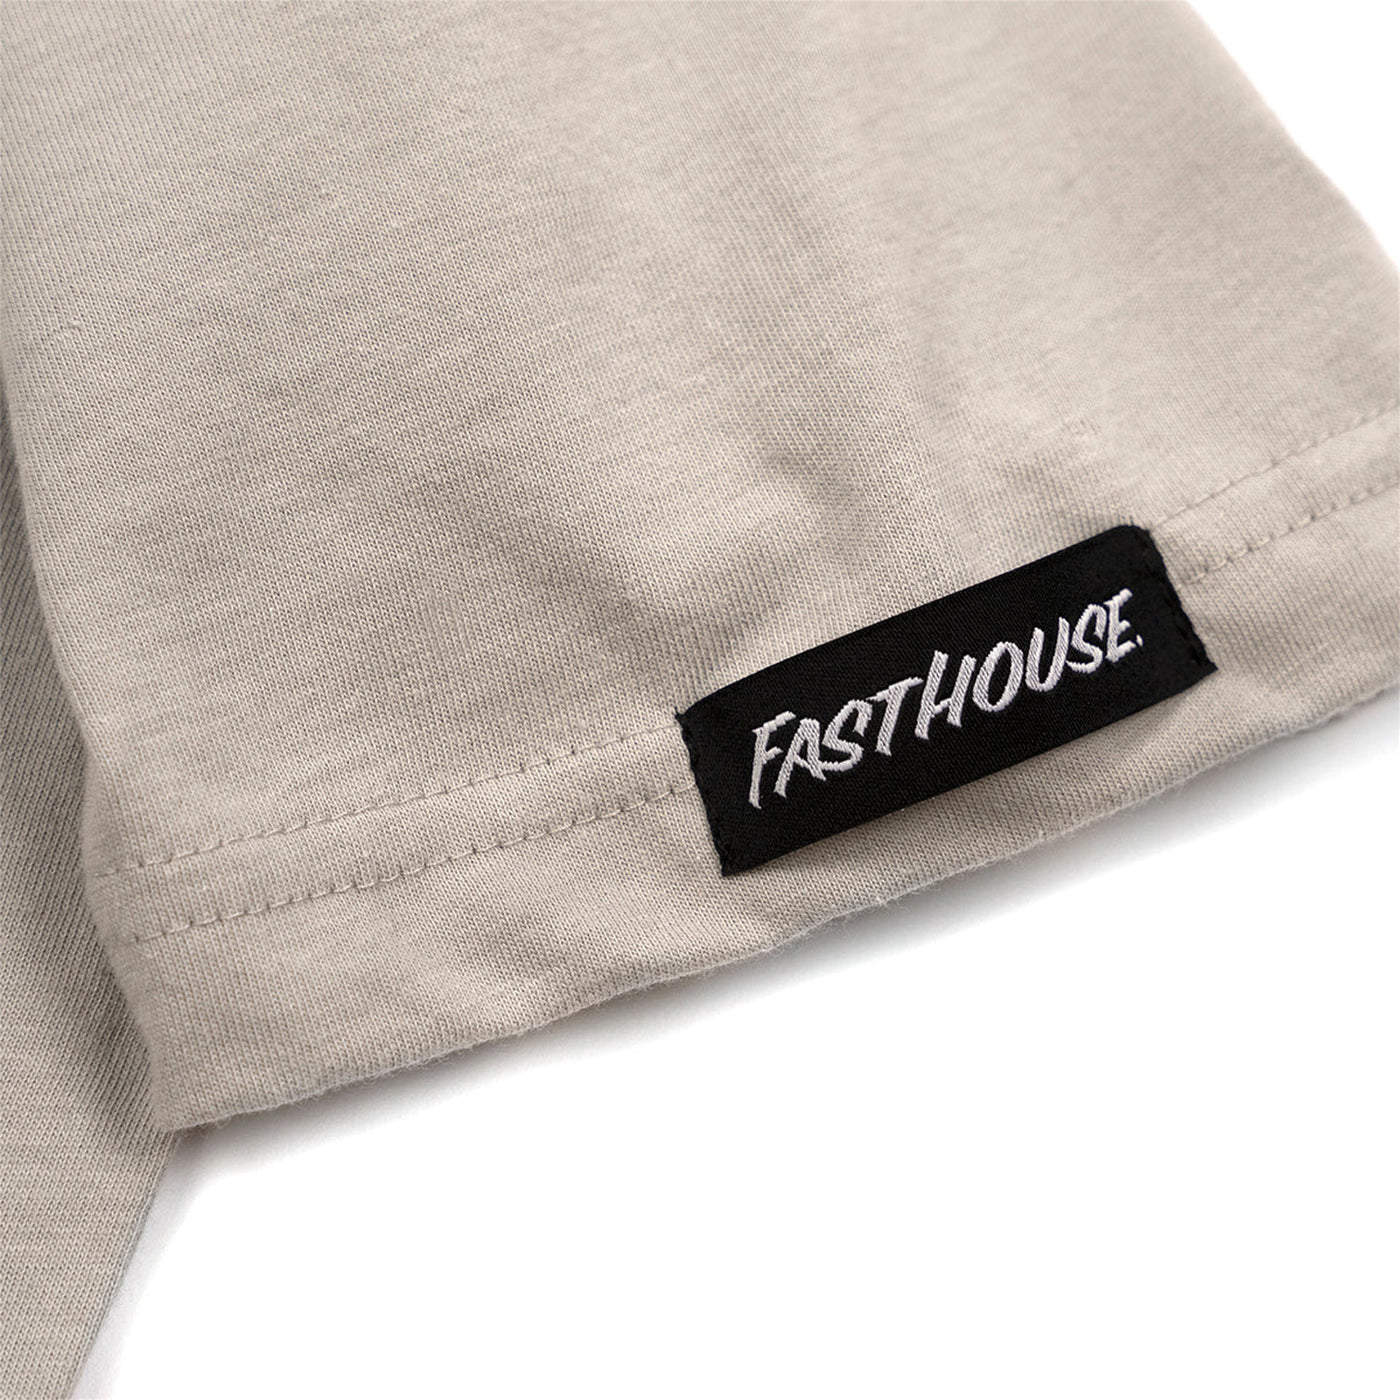 Fasthouse 805 Atmosphere Tee